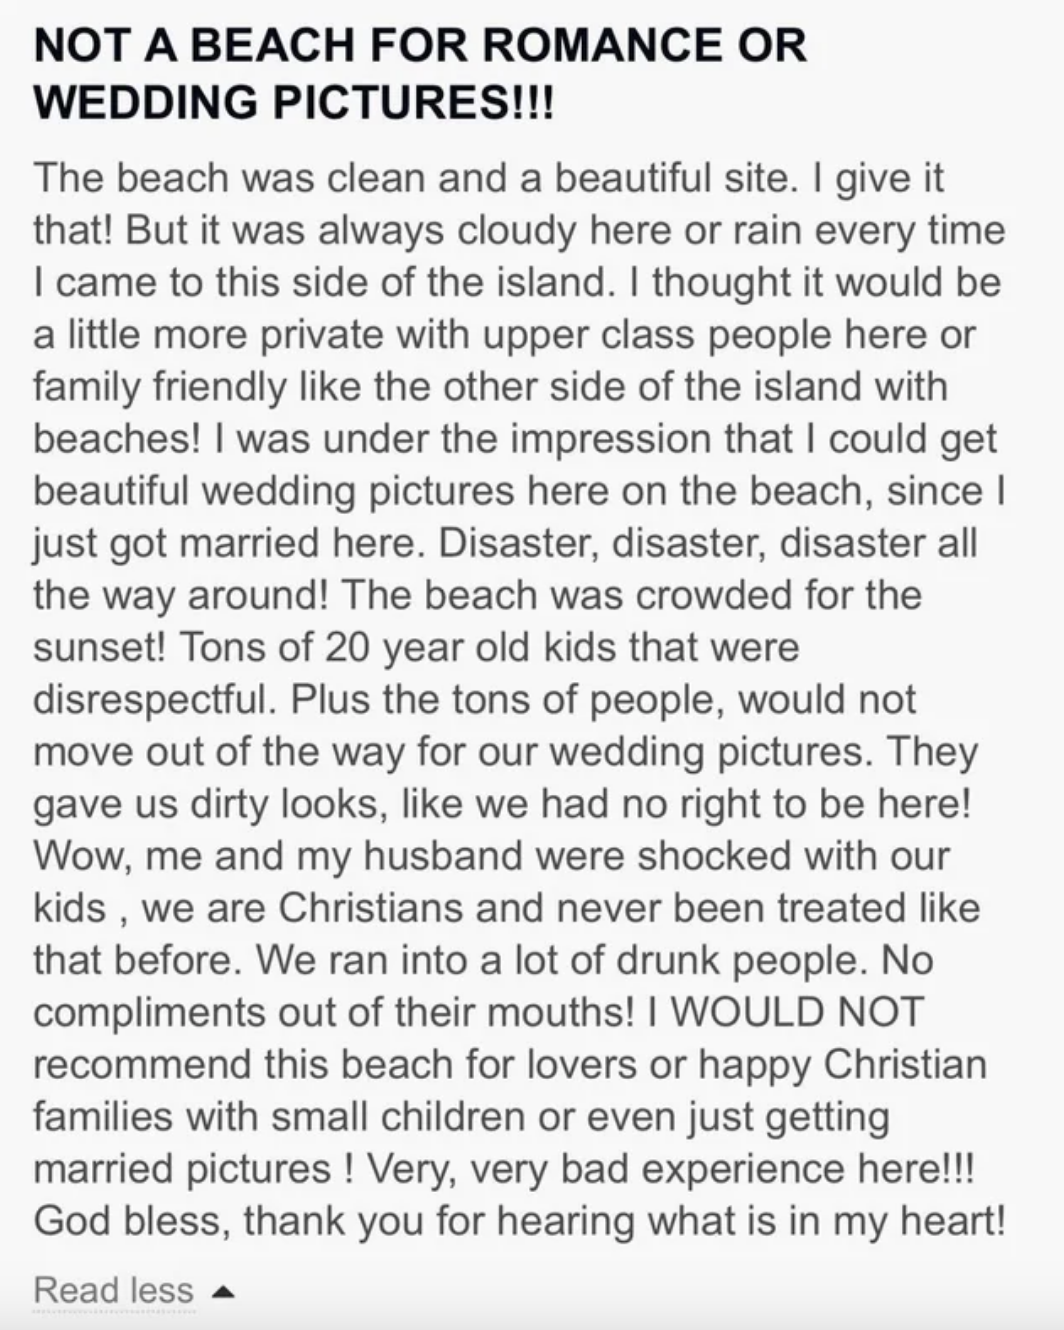 The review complains that there were too many people on the beach and that people wouldn&#x27;t get out of the way so the reviewer could take wedding pictures